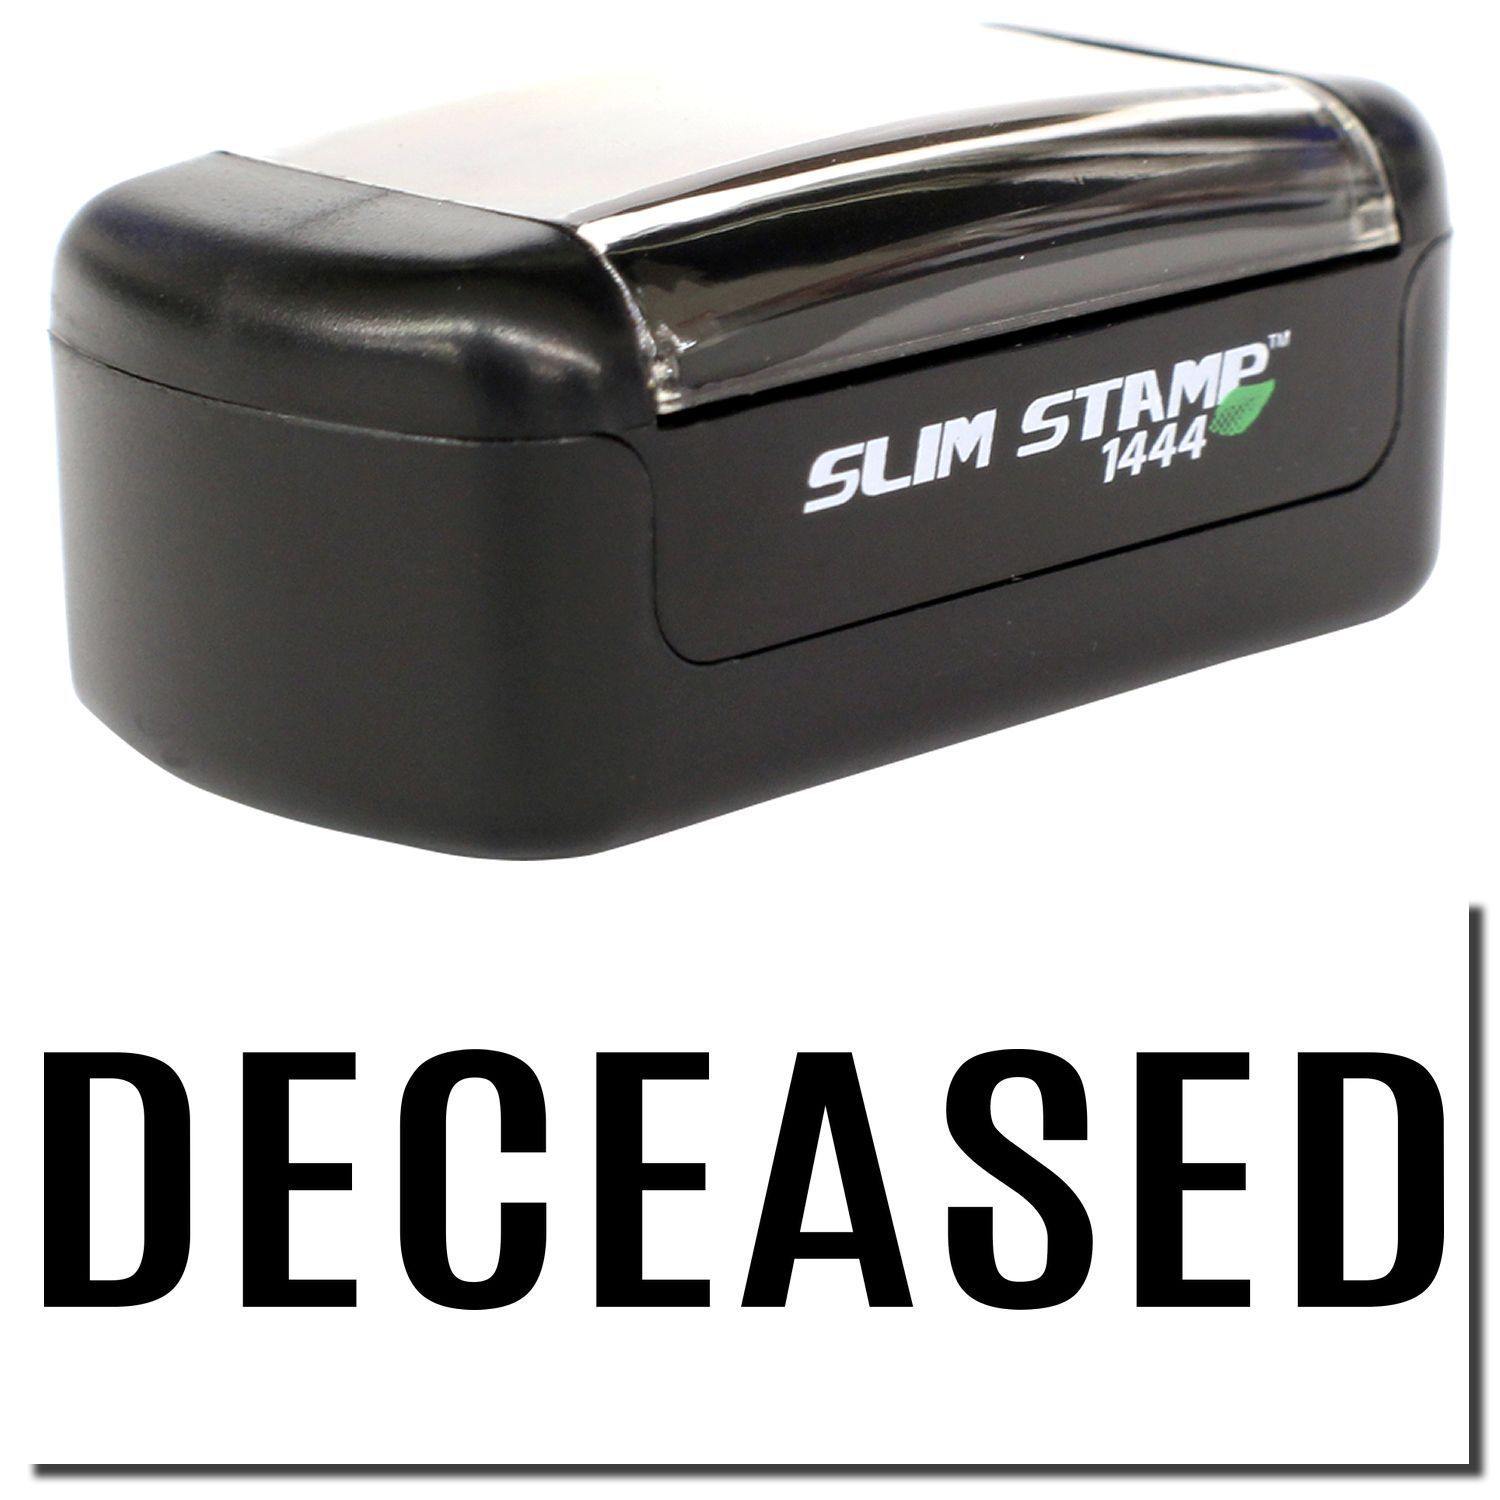 A stock office pre-inked stamp with a stamped image showing how the text "DECEASED" in bold font is displayed after stamping.